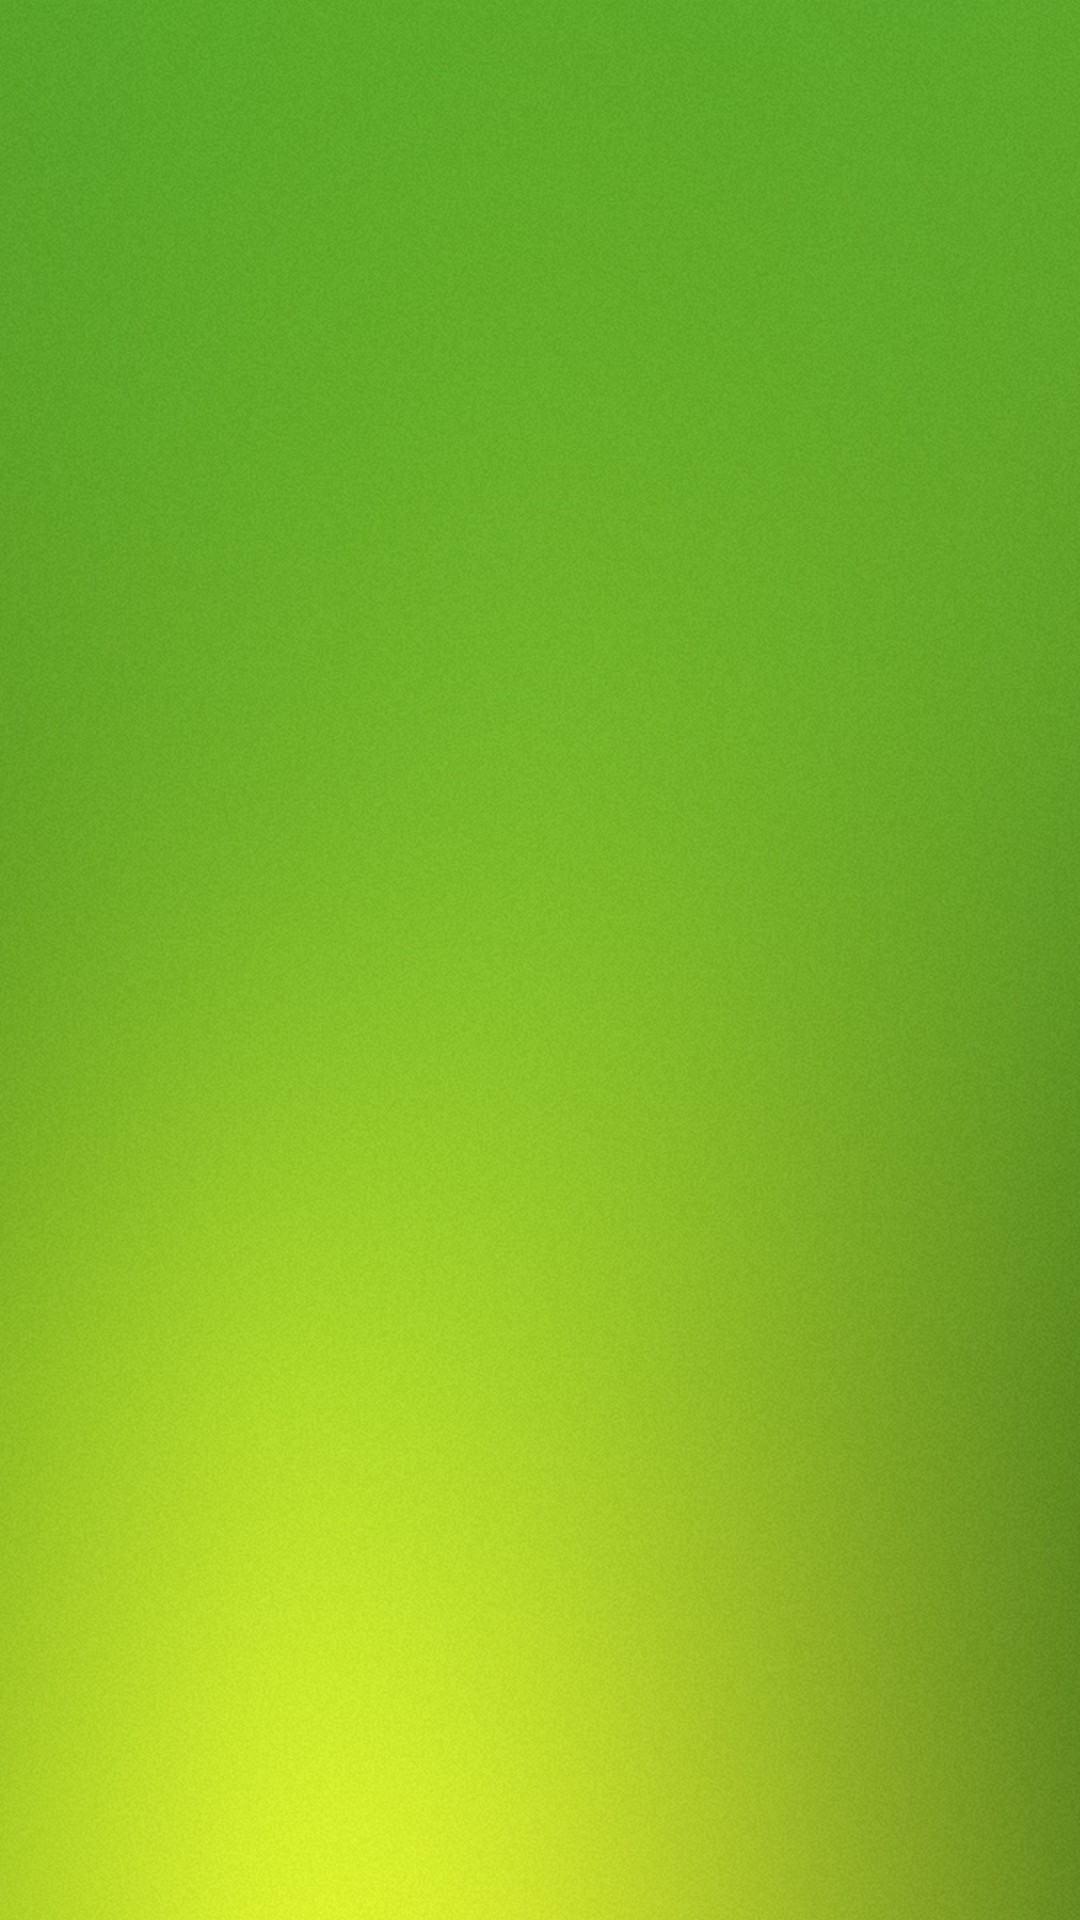 Lime Green Wallpaper Android with image resolution 1080x1920 pixel. You can make this wallpaper for your Android backgrounds, Tablet, Smartphones Screensavers and Mobile Phone Lock Screen